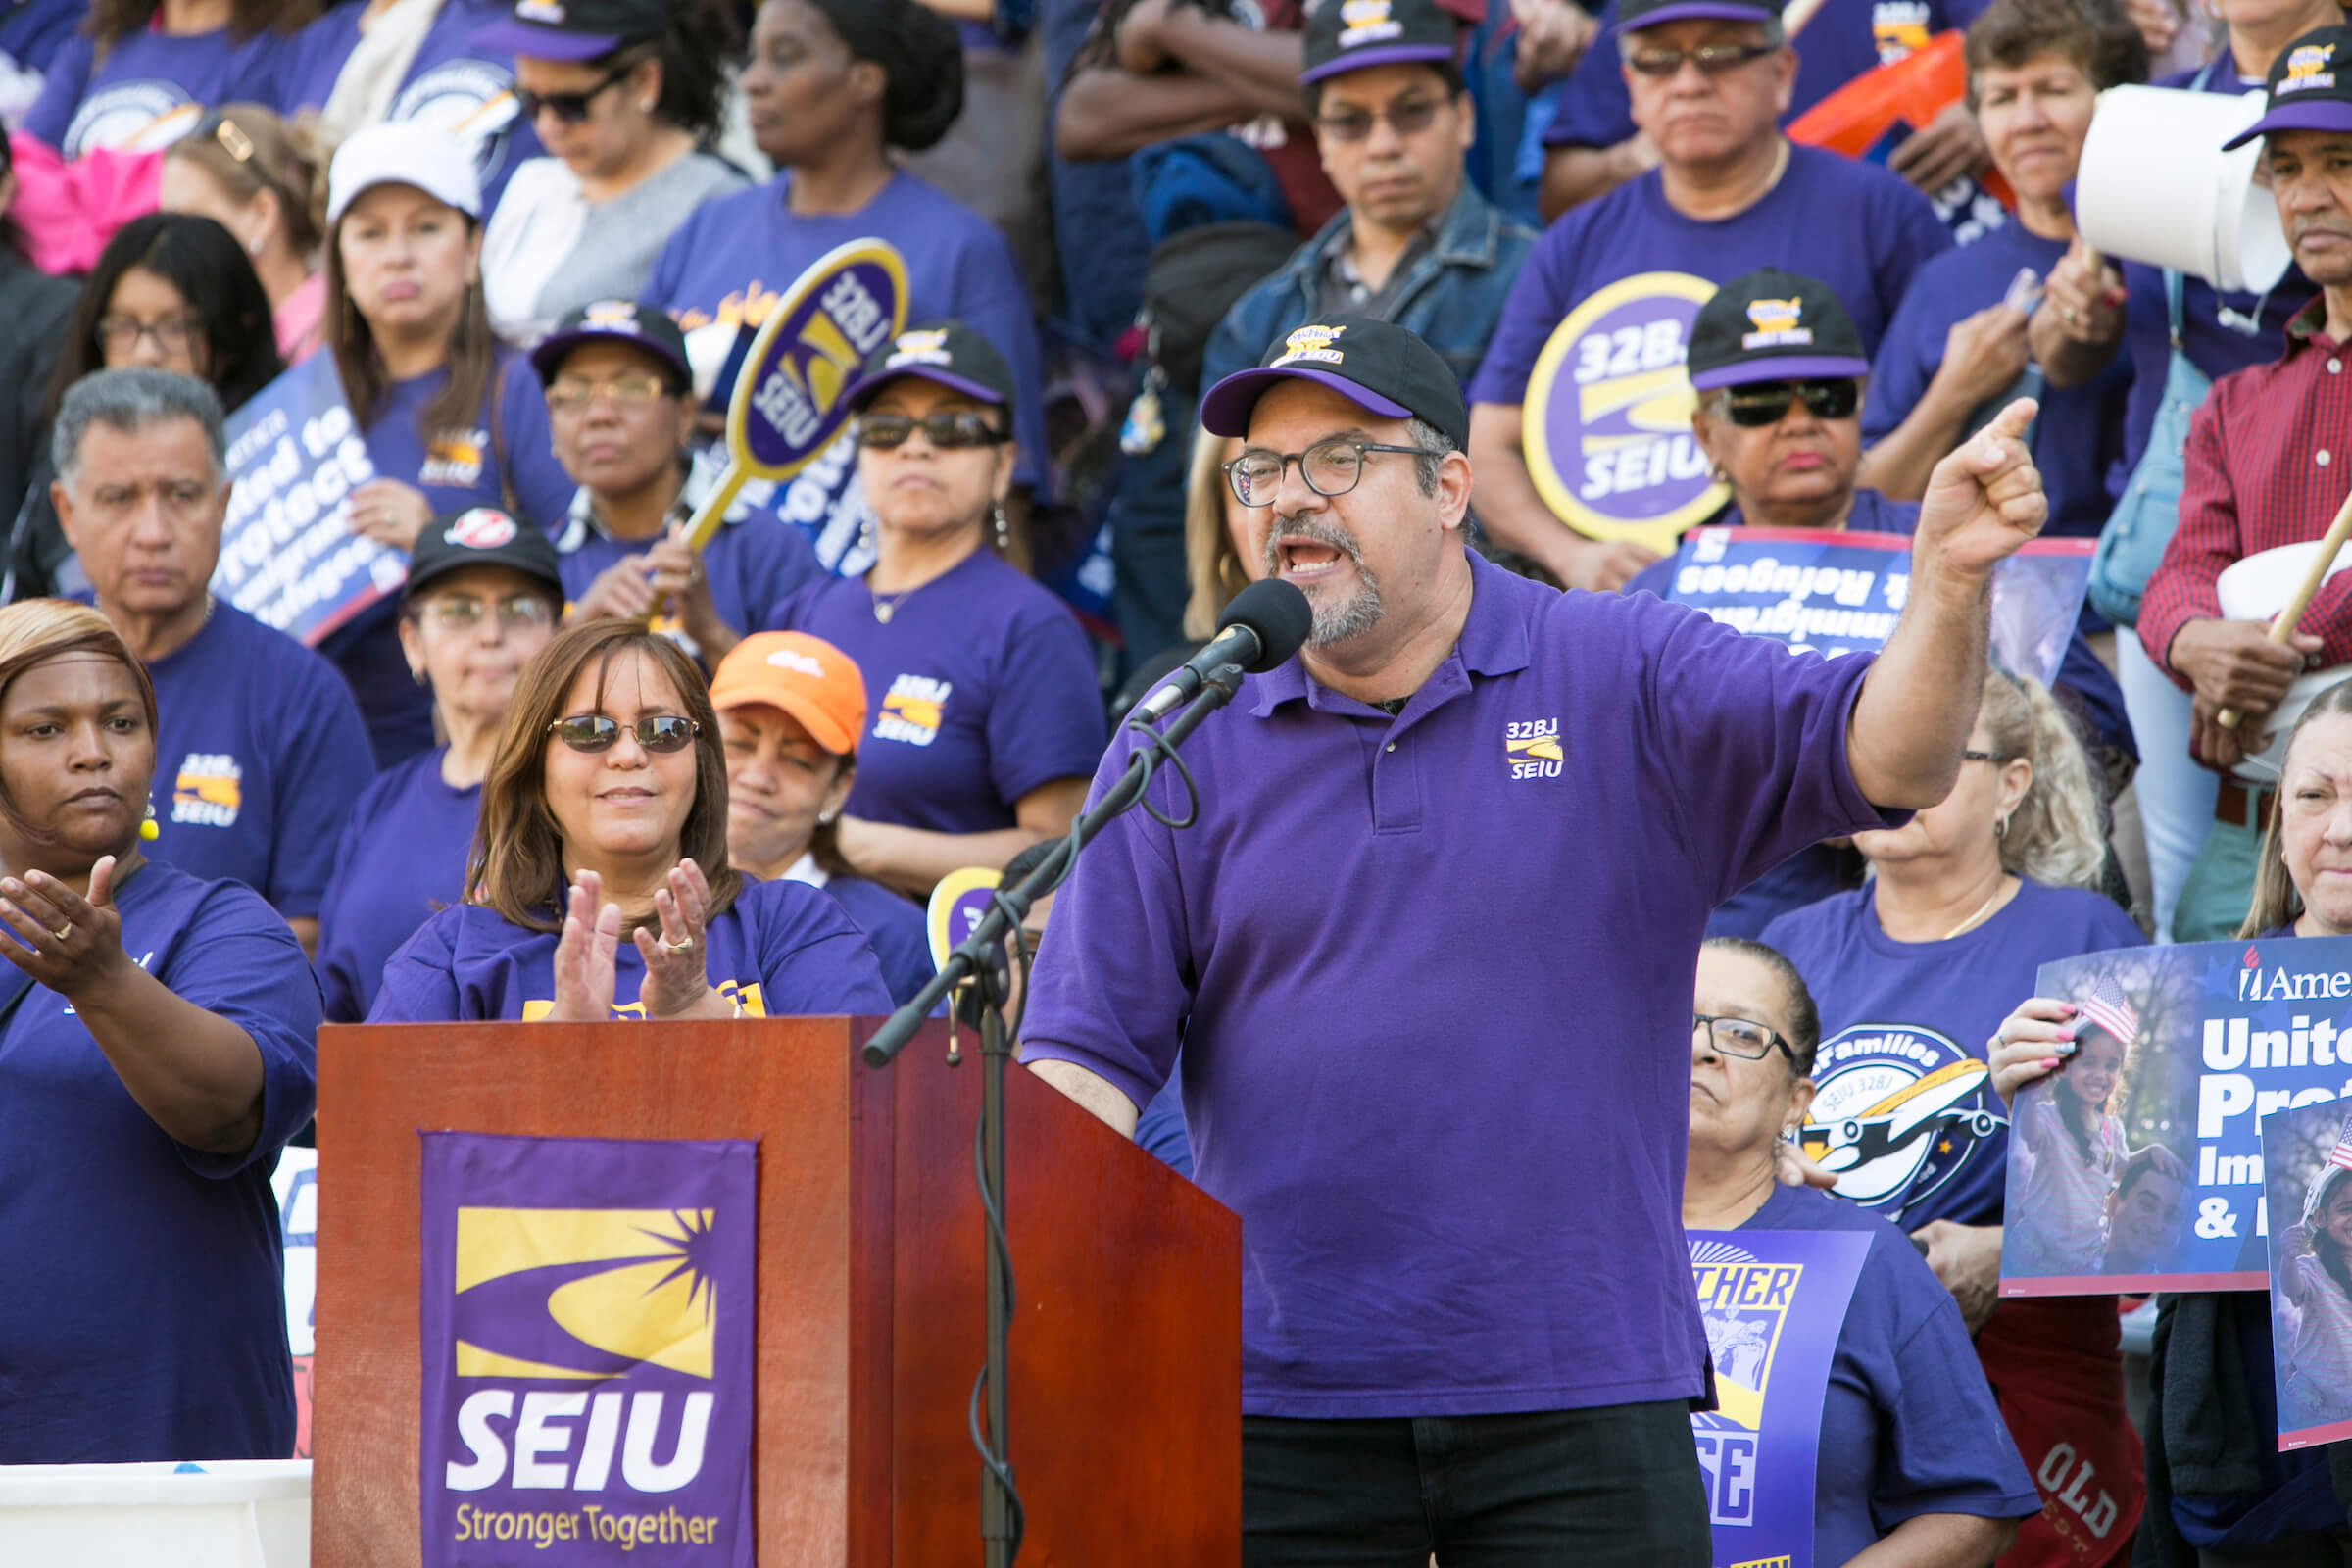 Hector Figueroa was president of 32BJ SEIU, one of the city's largest and most powerful labor unions.